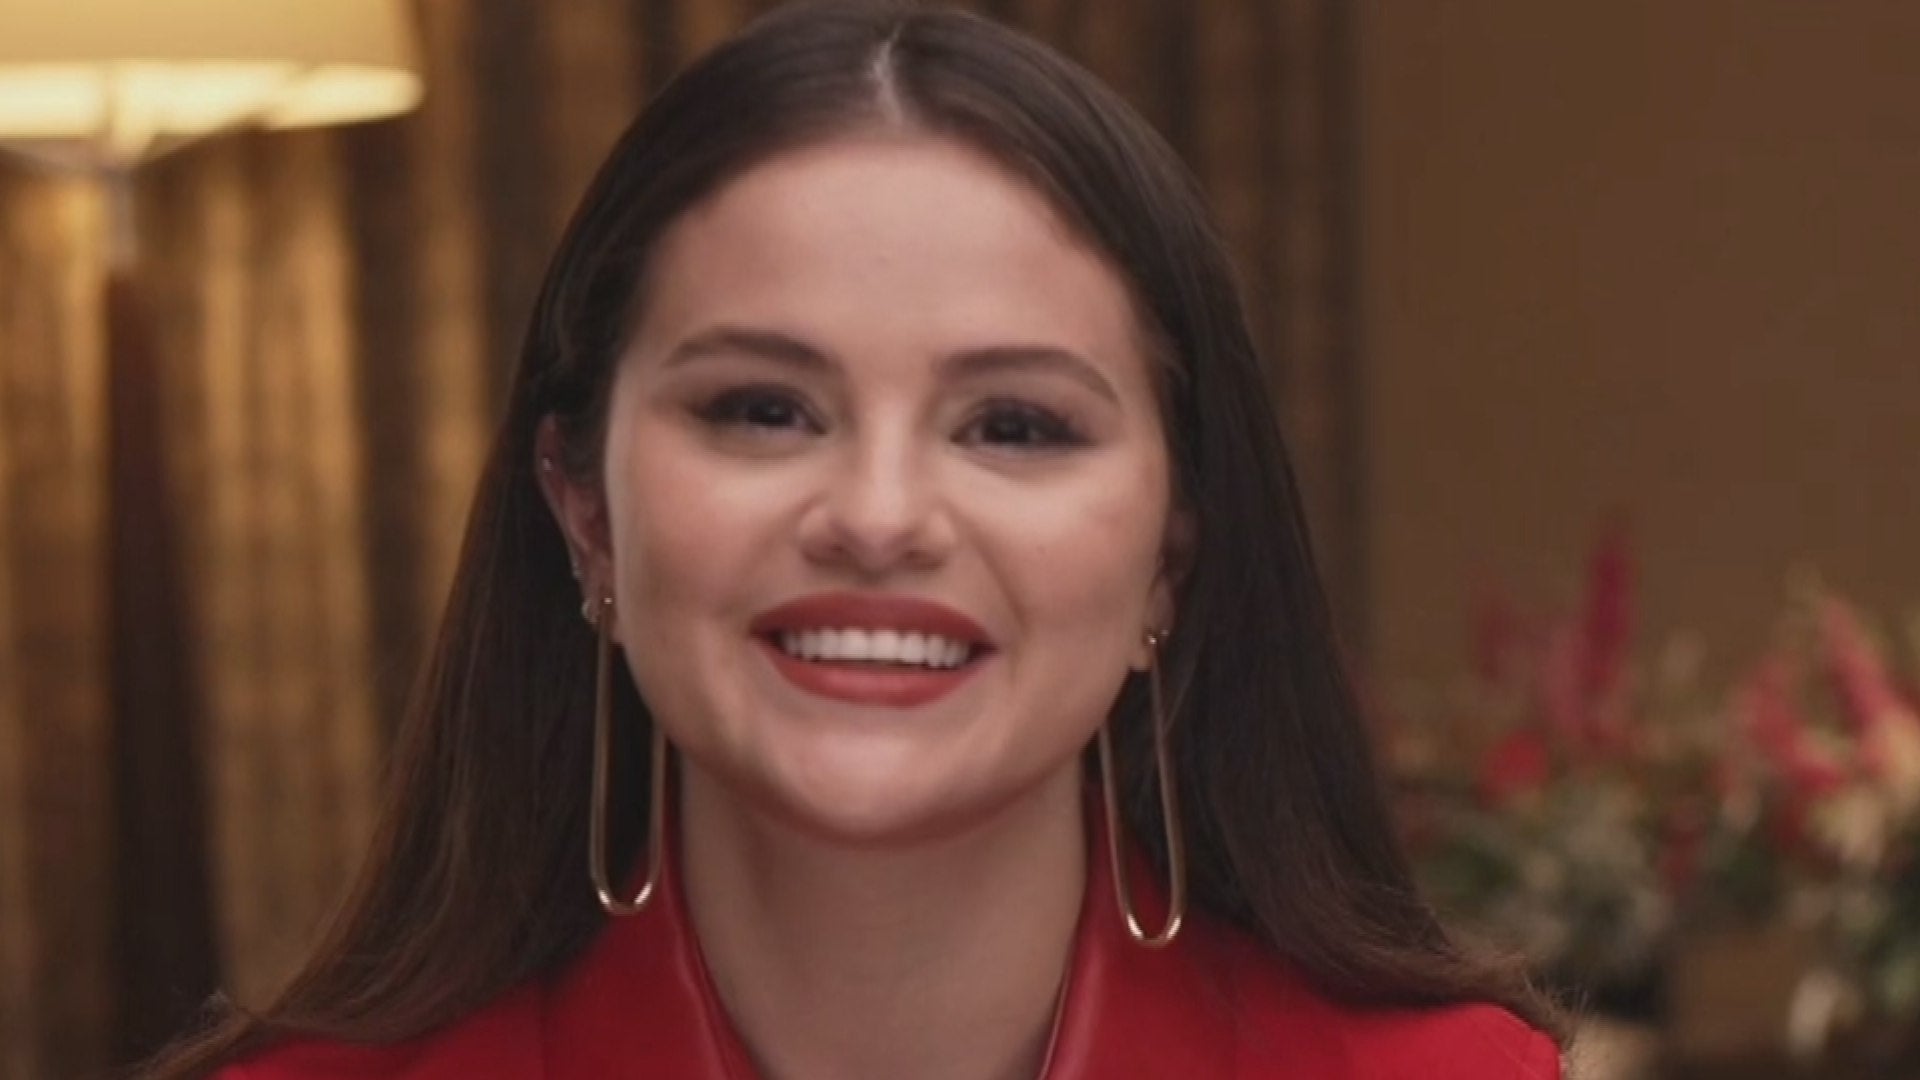 Selena Gomez Is 'More Open to Love' But Not Focused on Dating (Source)